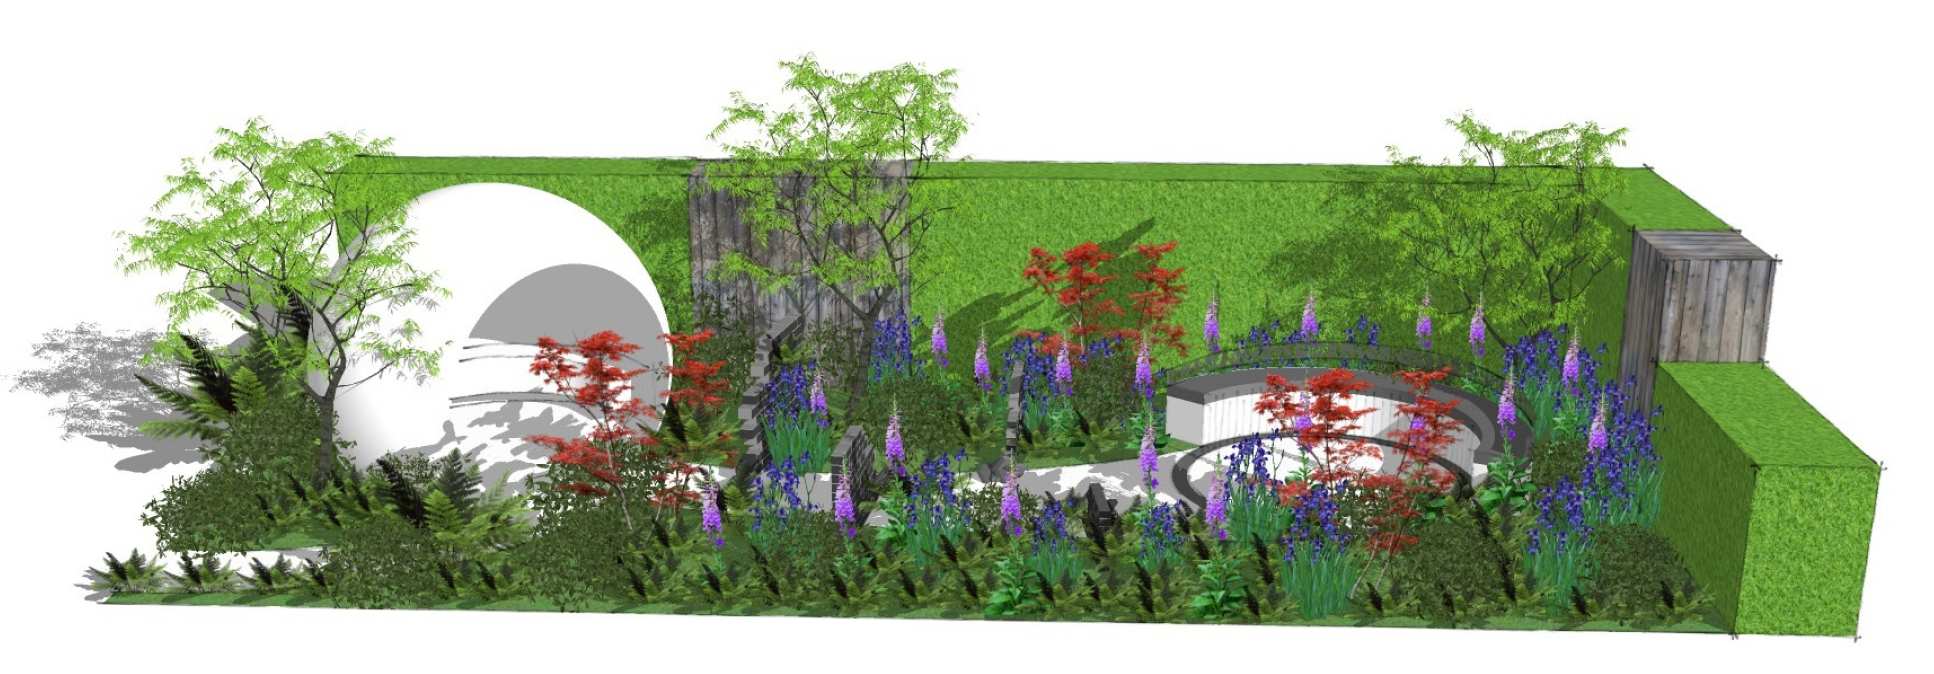 A 3D illustration of the HIV garden